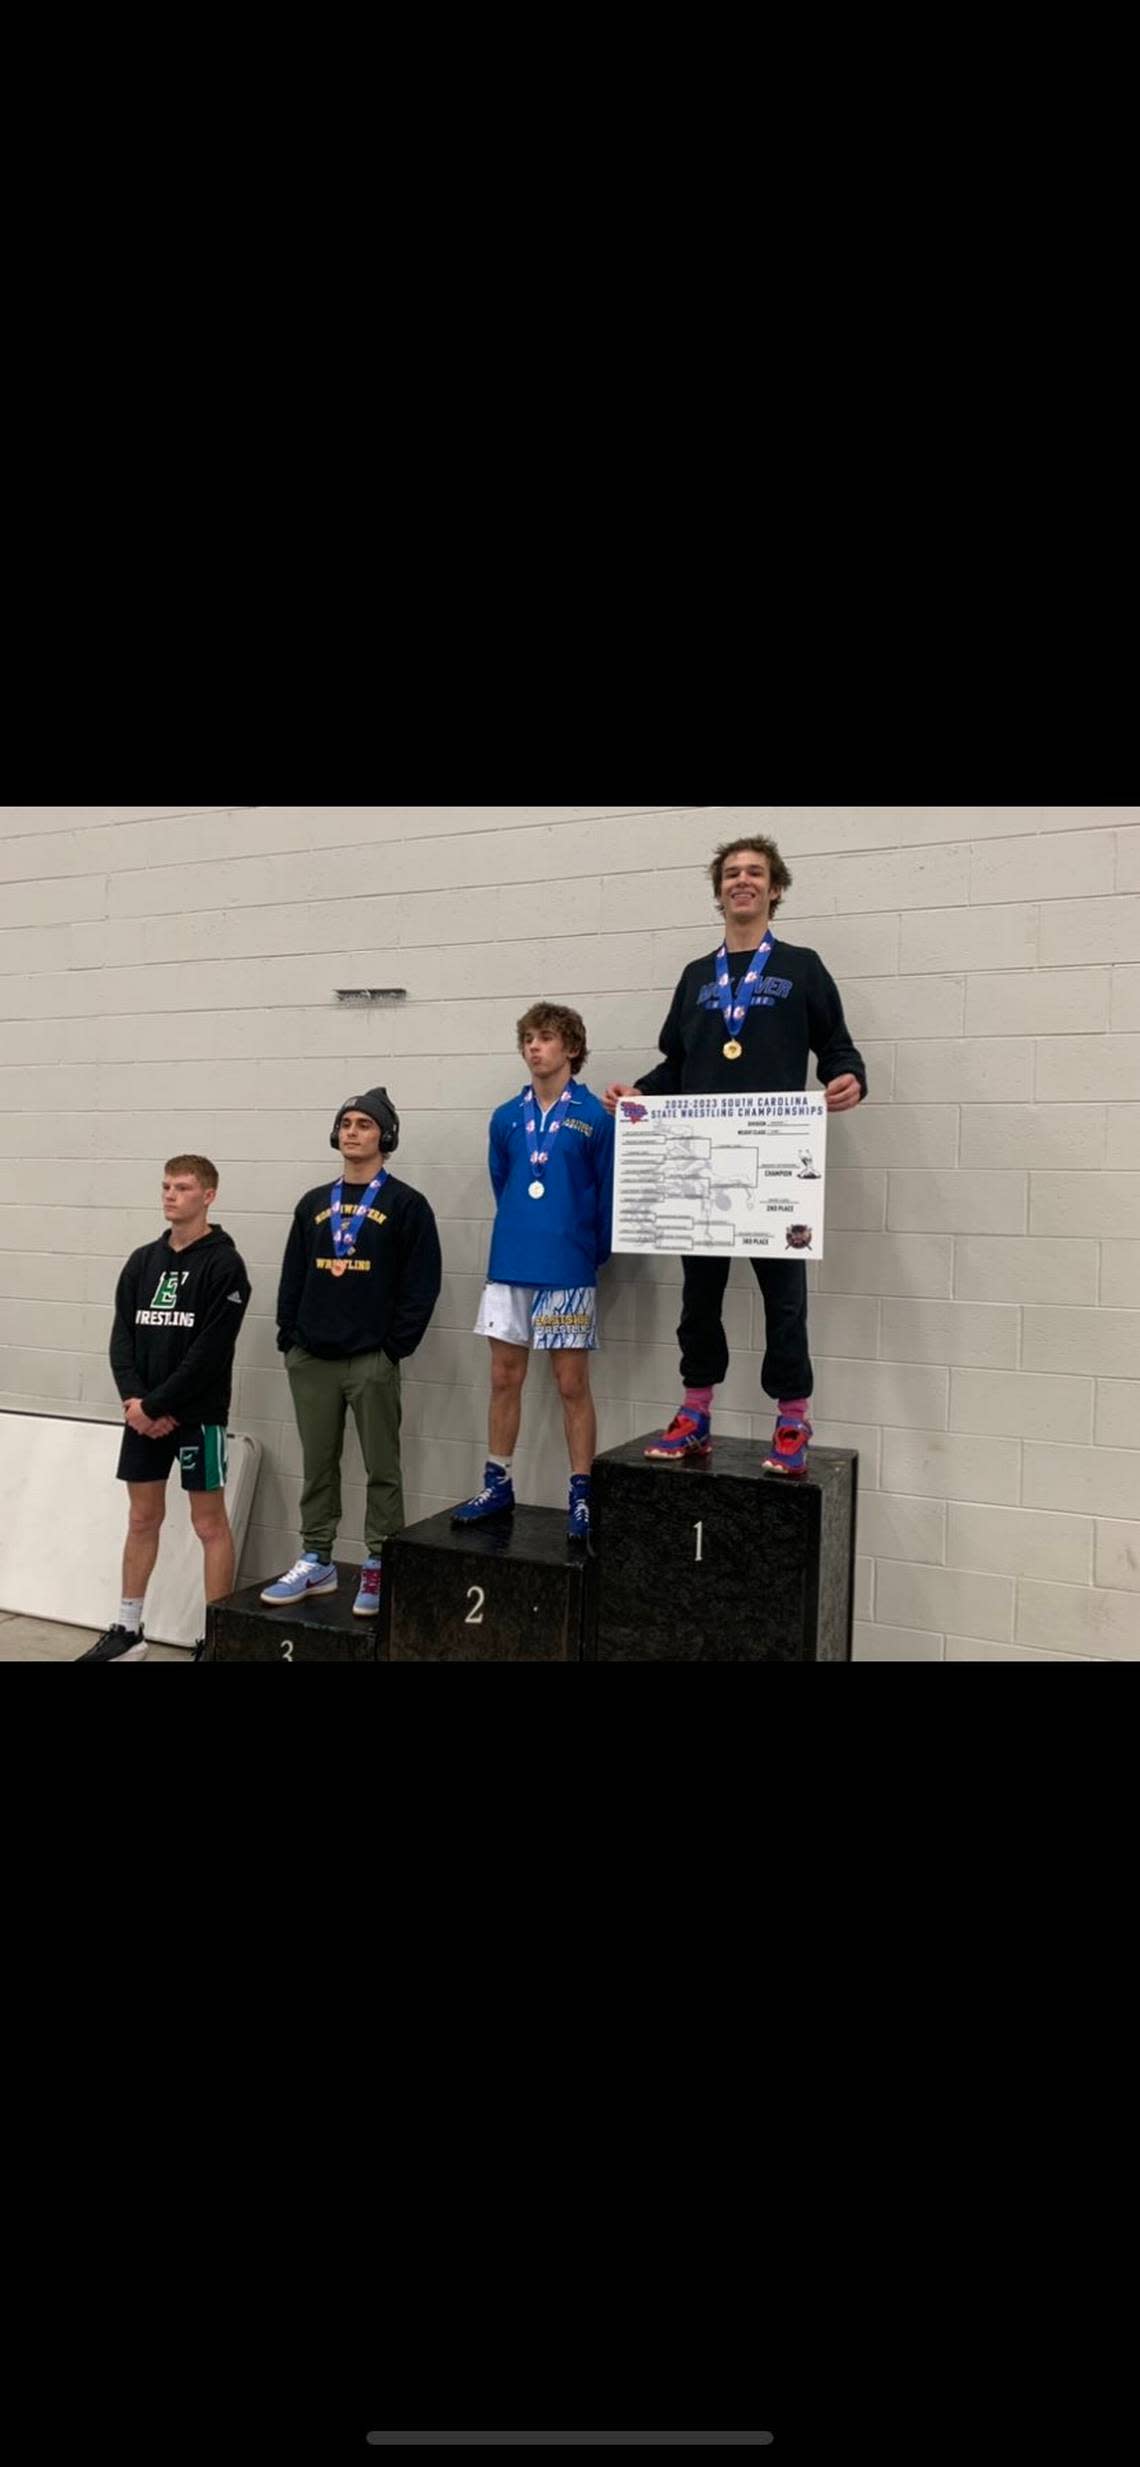 May River’s Isaiah Wysong won the Class 4A, 138-pound championship on Feb. 25, 2023.